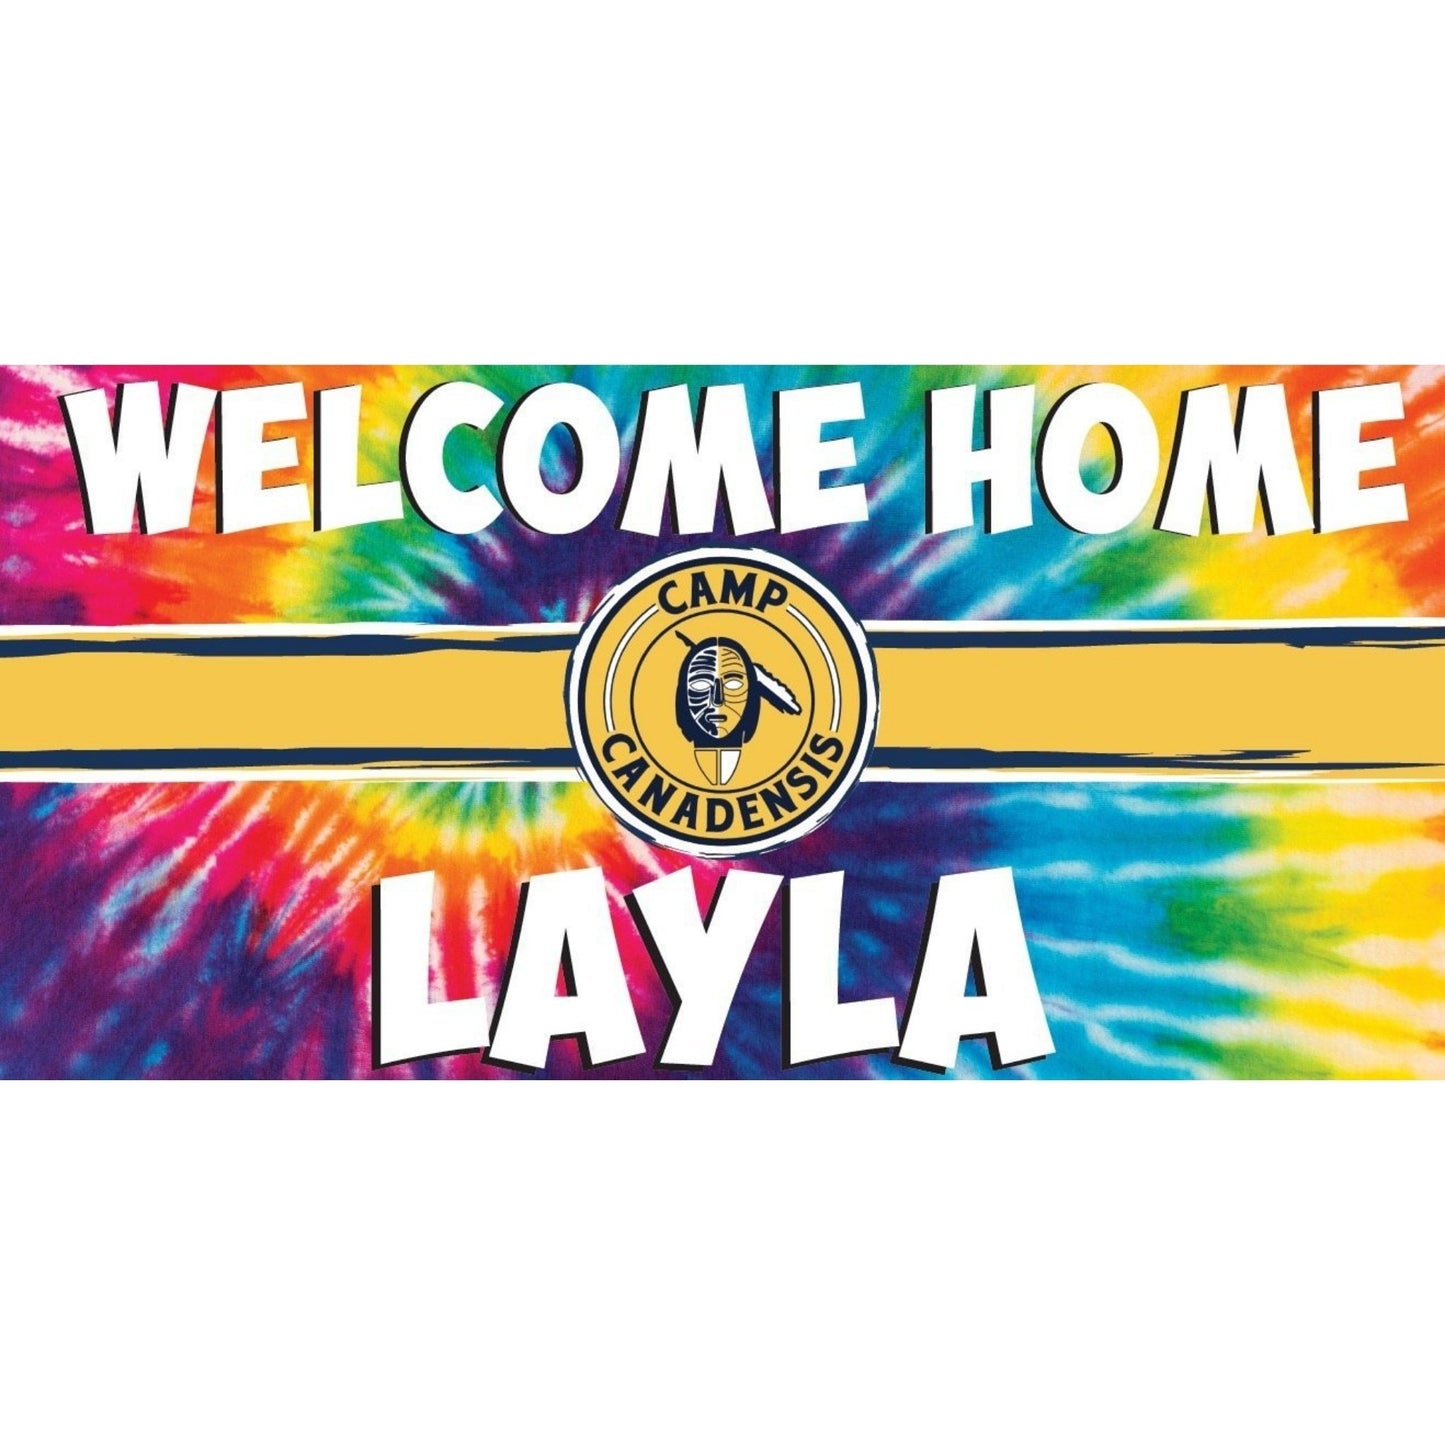 Welcome Home Banner - a Spirit Animal - Favorite Things Banner $45-$60 360 Creative 360 creative apprpach